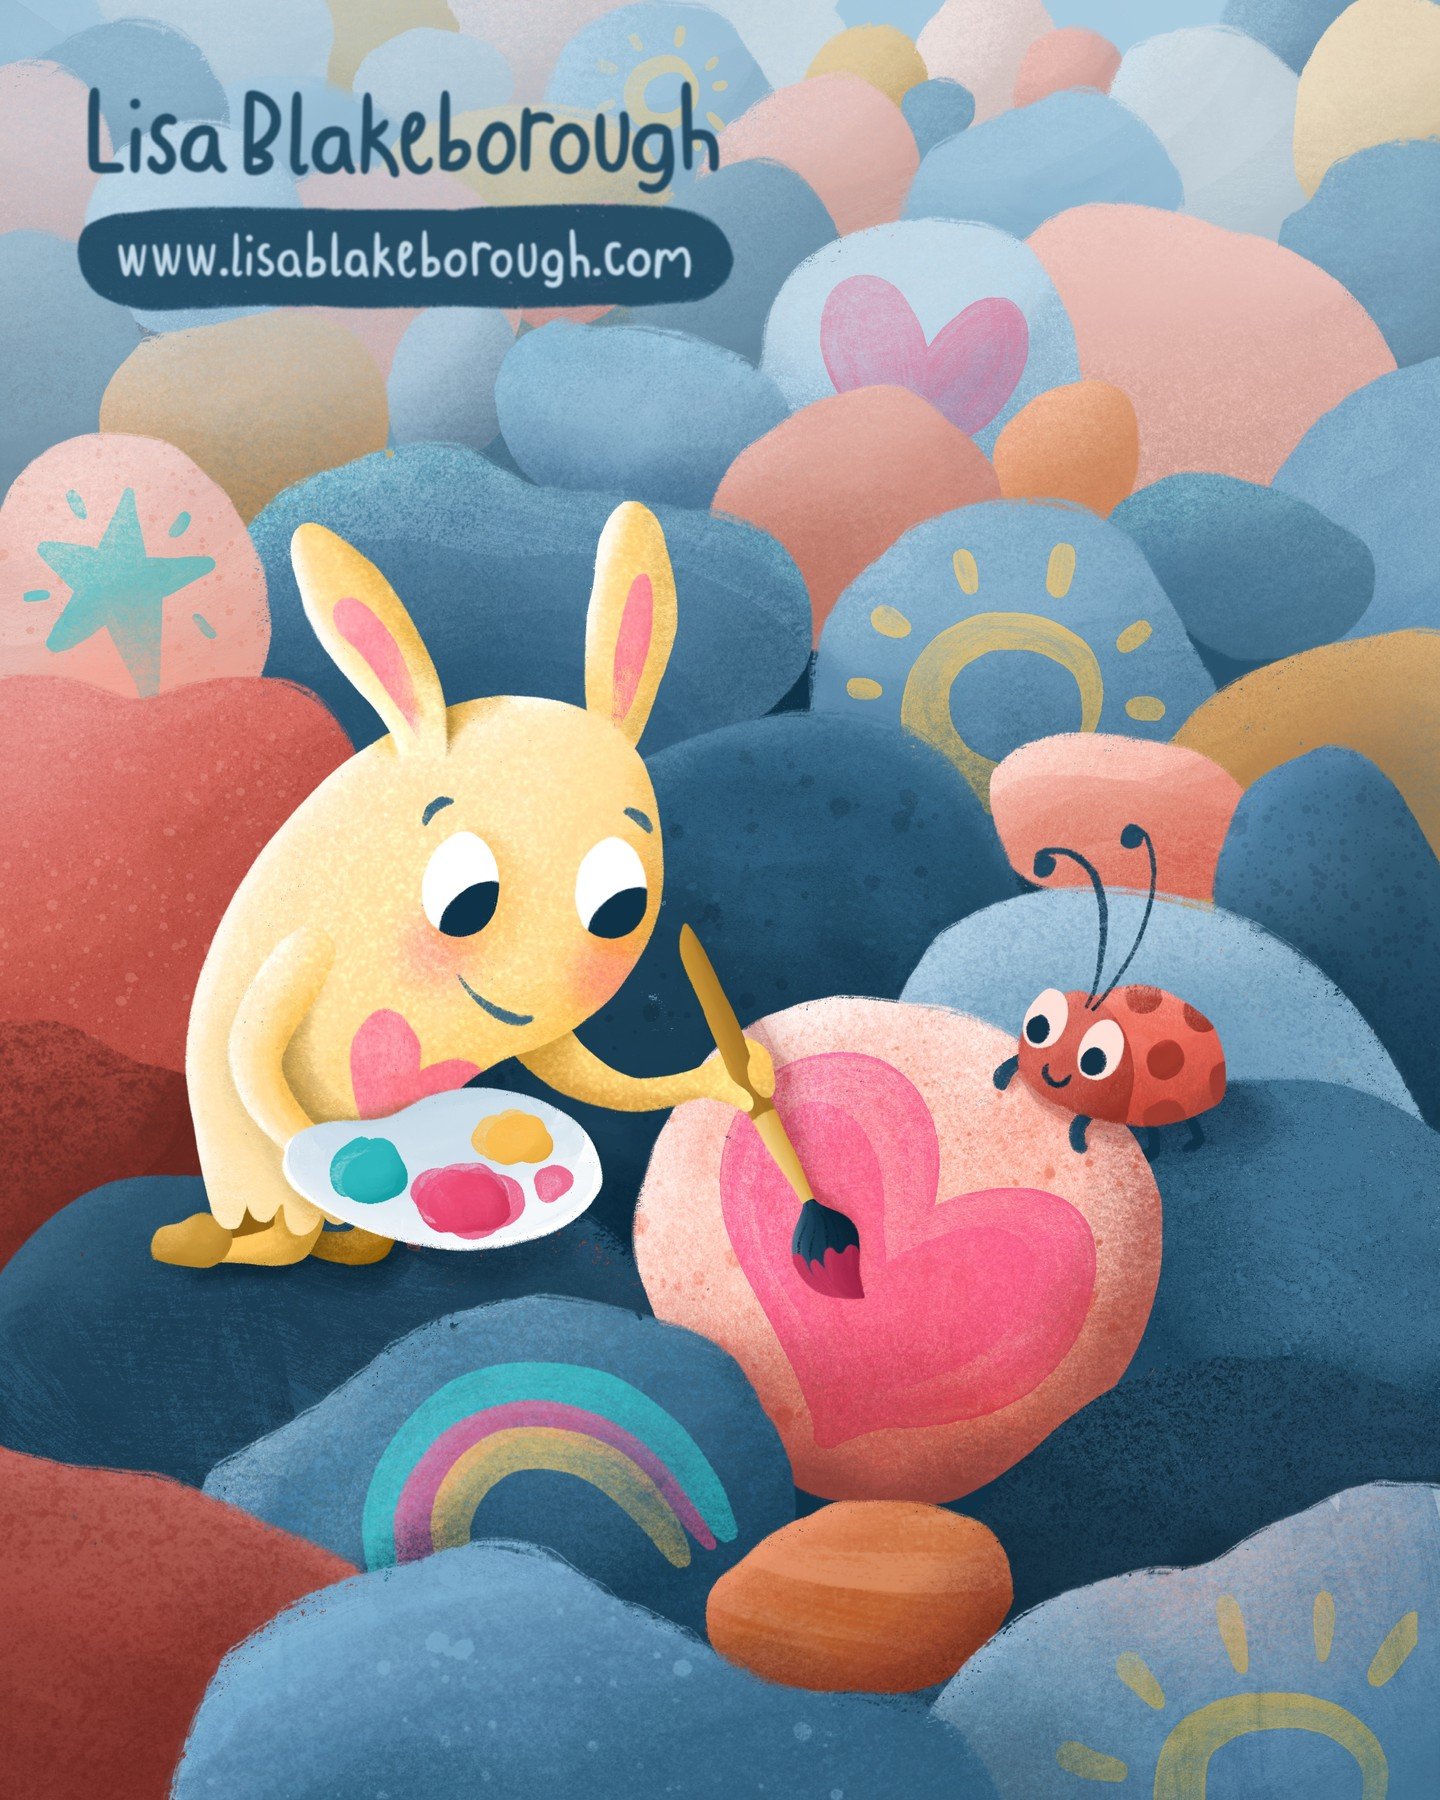 Hello! Happy May and happy #kidlitartpostcard day!

I&rsquo;m Lisa Blakeborough, a children&rsquo;s illustrator and visual storyteller from Minnesota. I love drawing diverse lovable characters, playful nature-inspired scenes, and moments of connectio